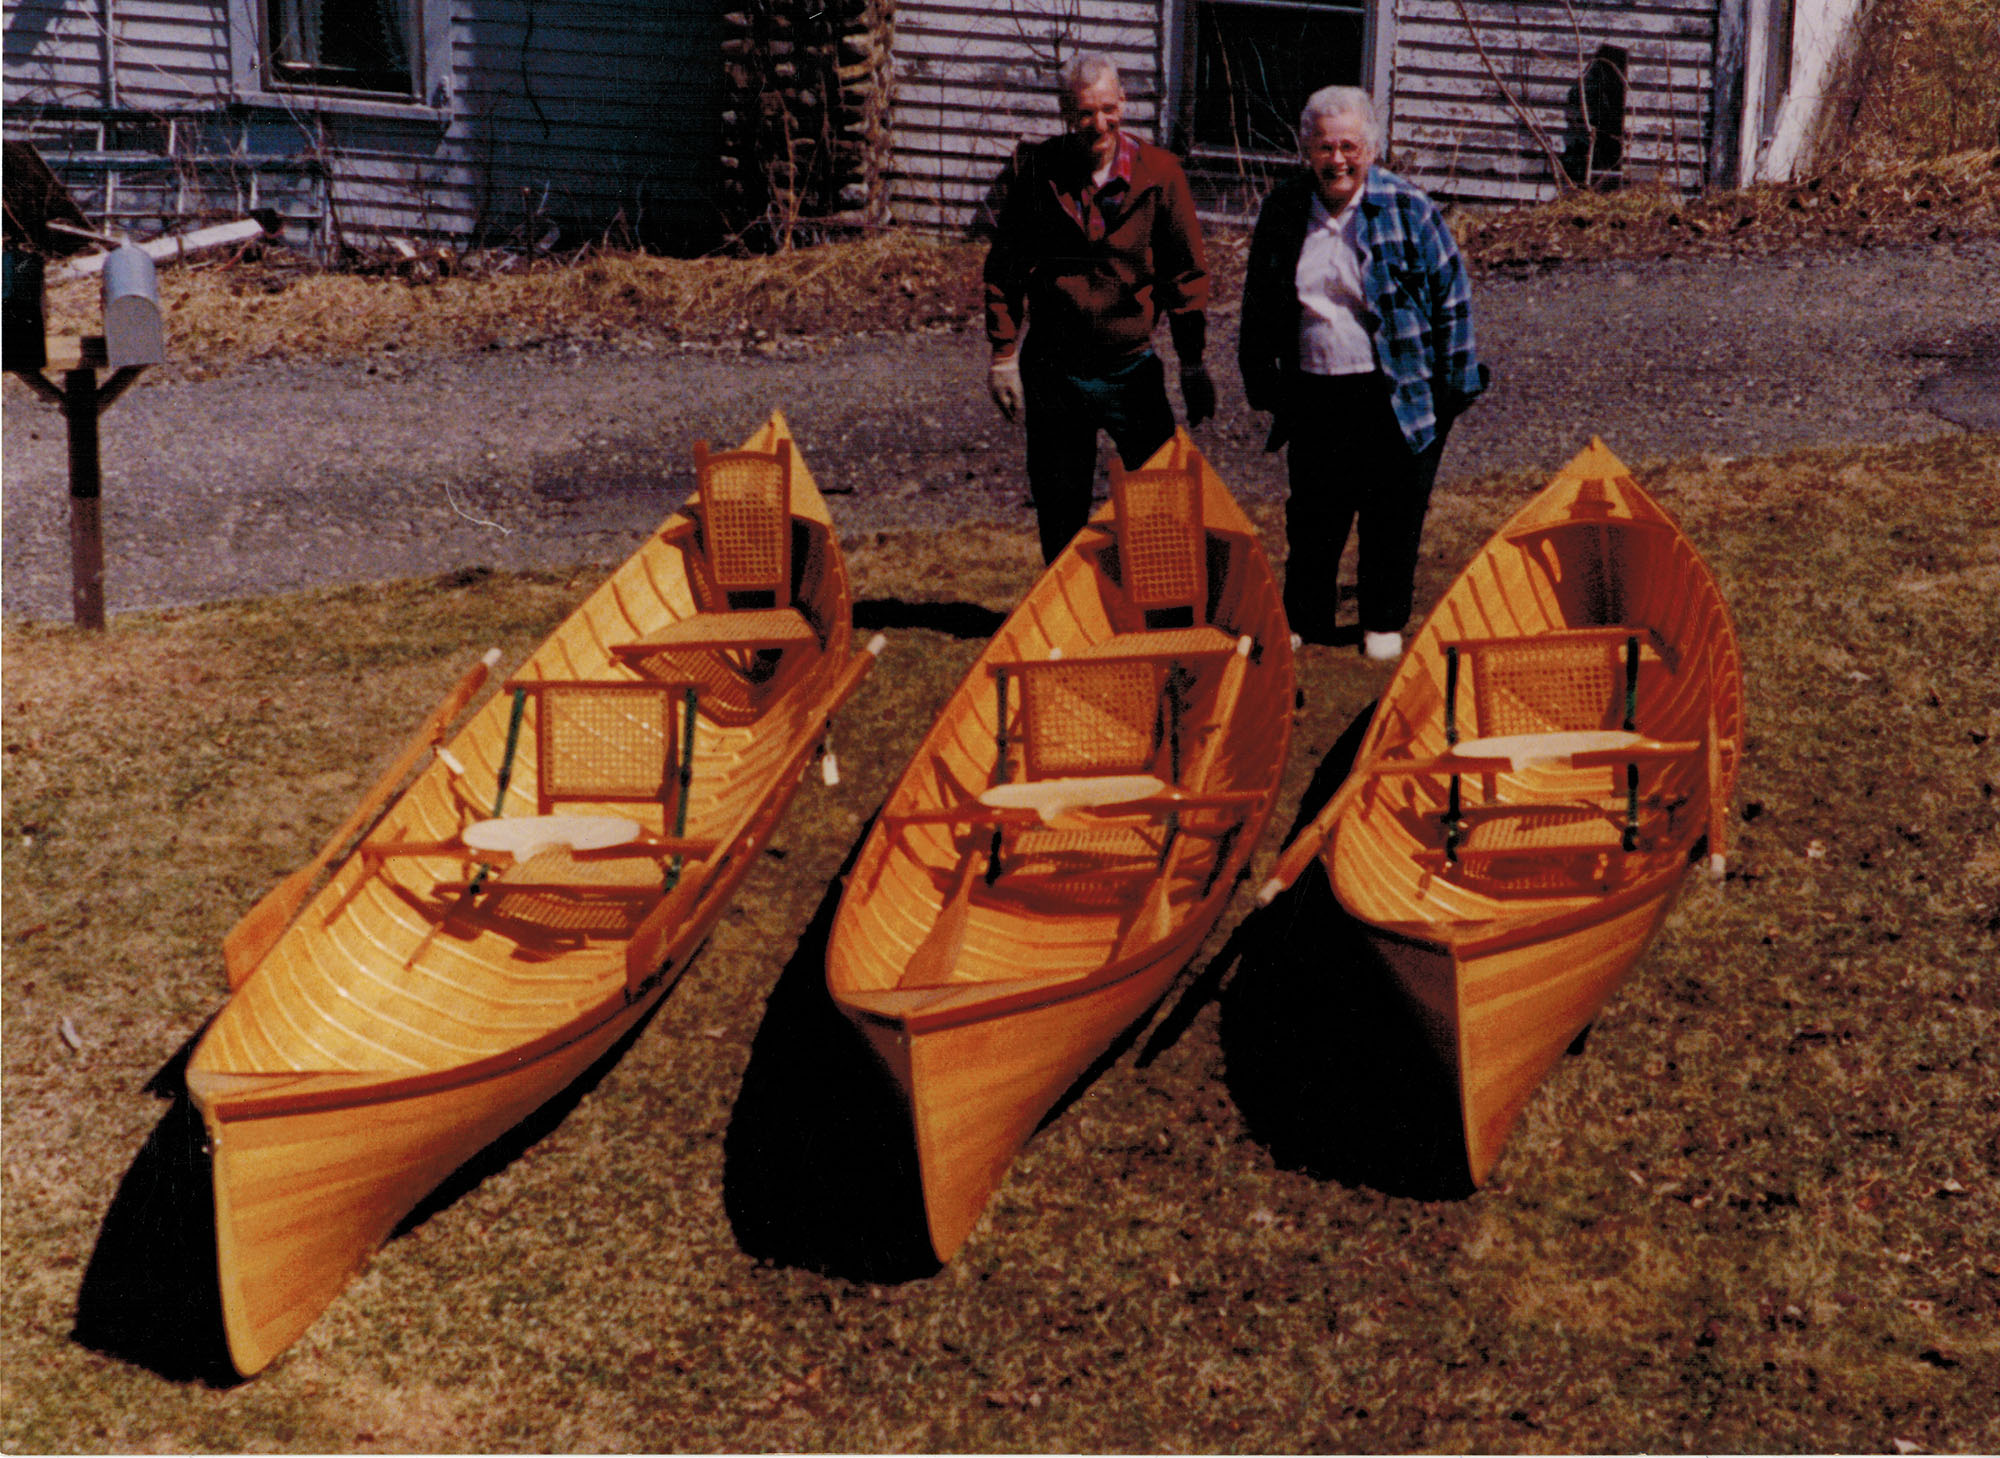 Boat builder Ralph Morrow and his wife with his guide boats